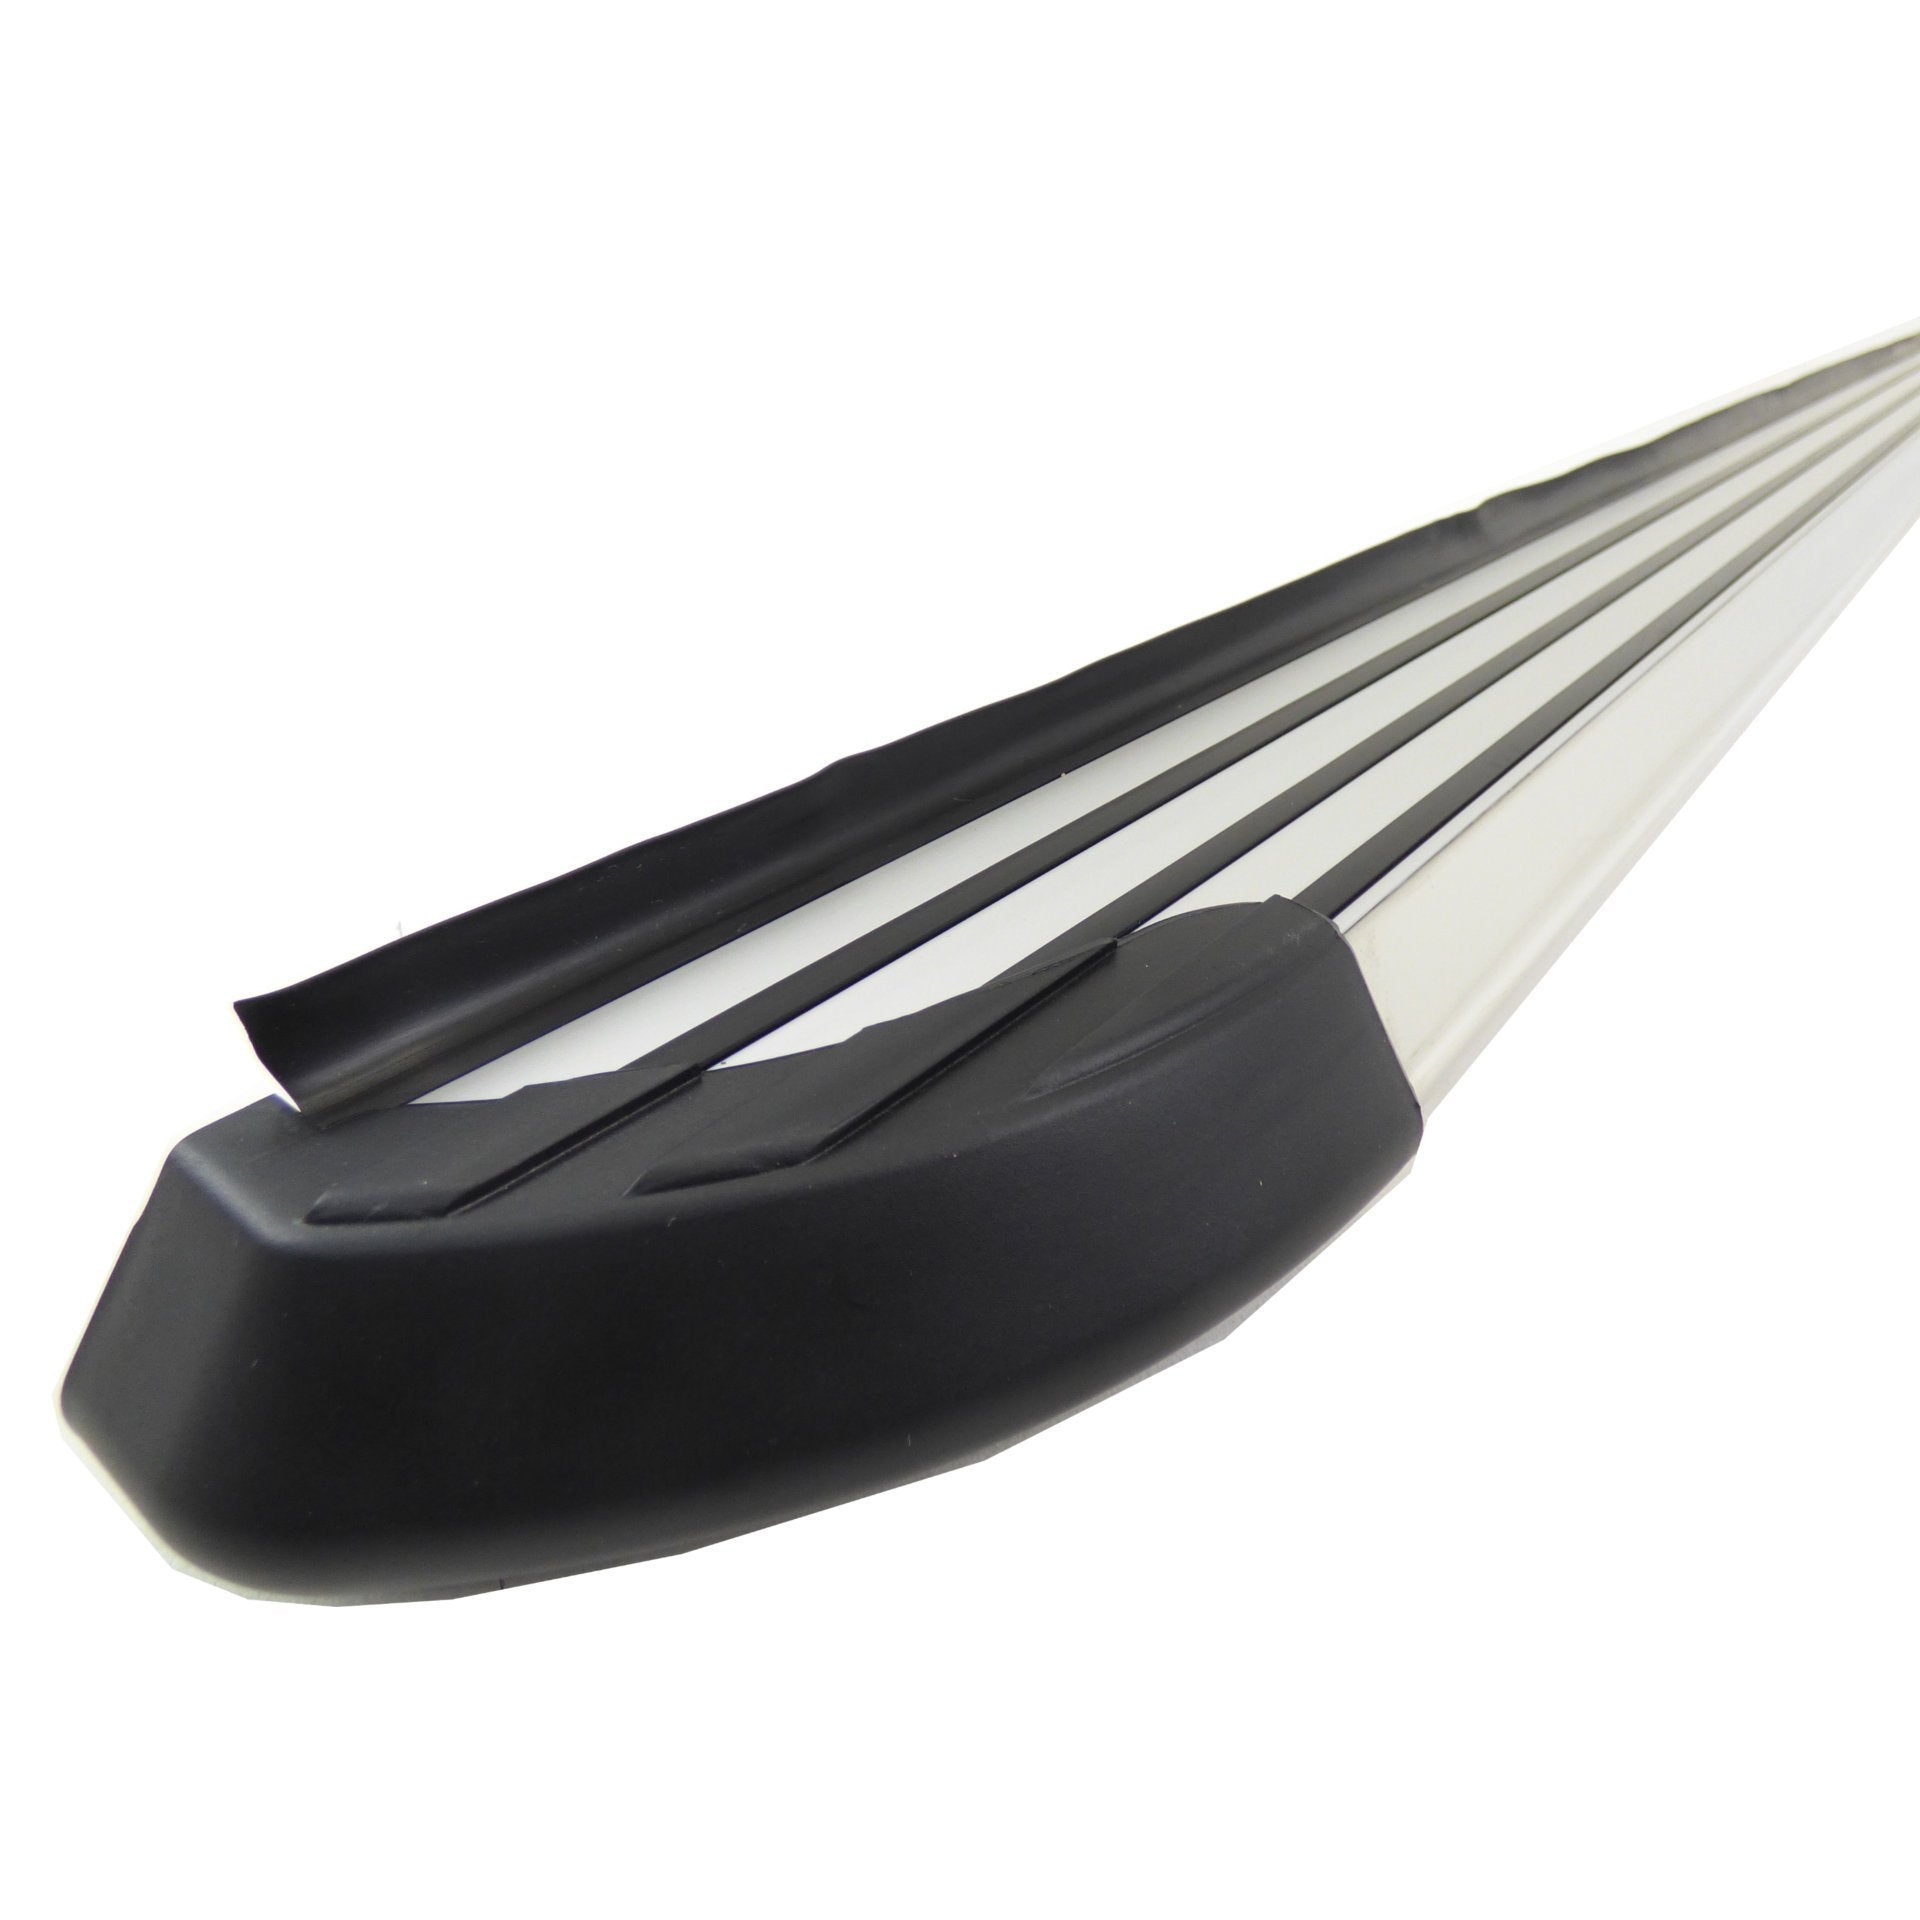 Stingray Side Steps Running Boards for BMW X5 E70 2007-2013 (inc. M Sport Models) -  - sold by Direct4x4